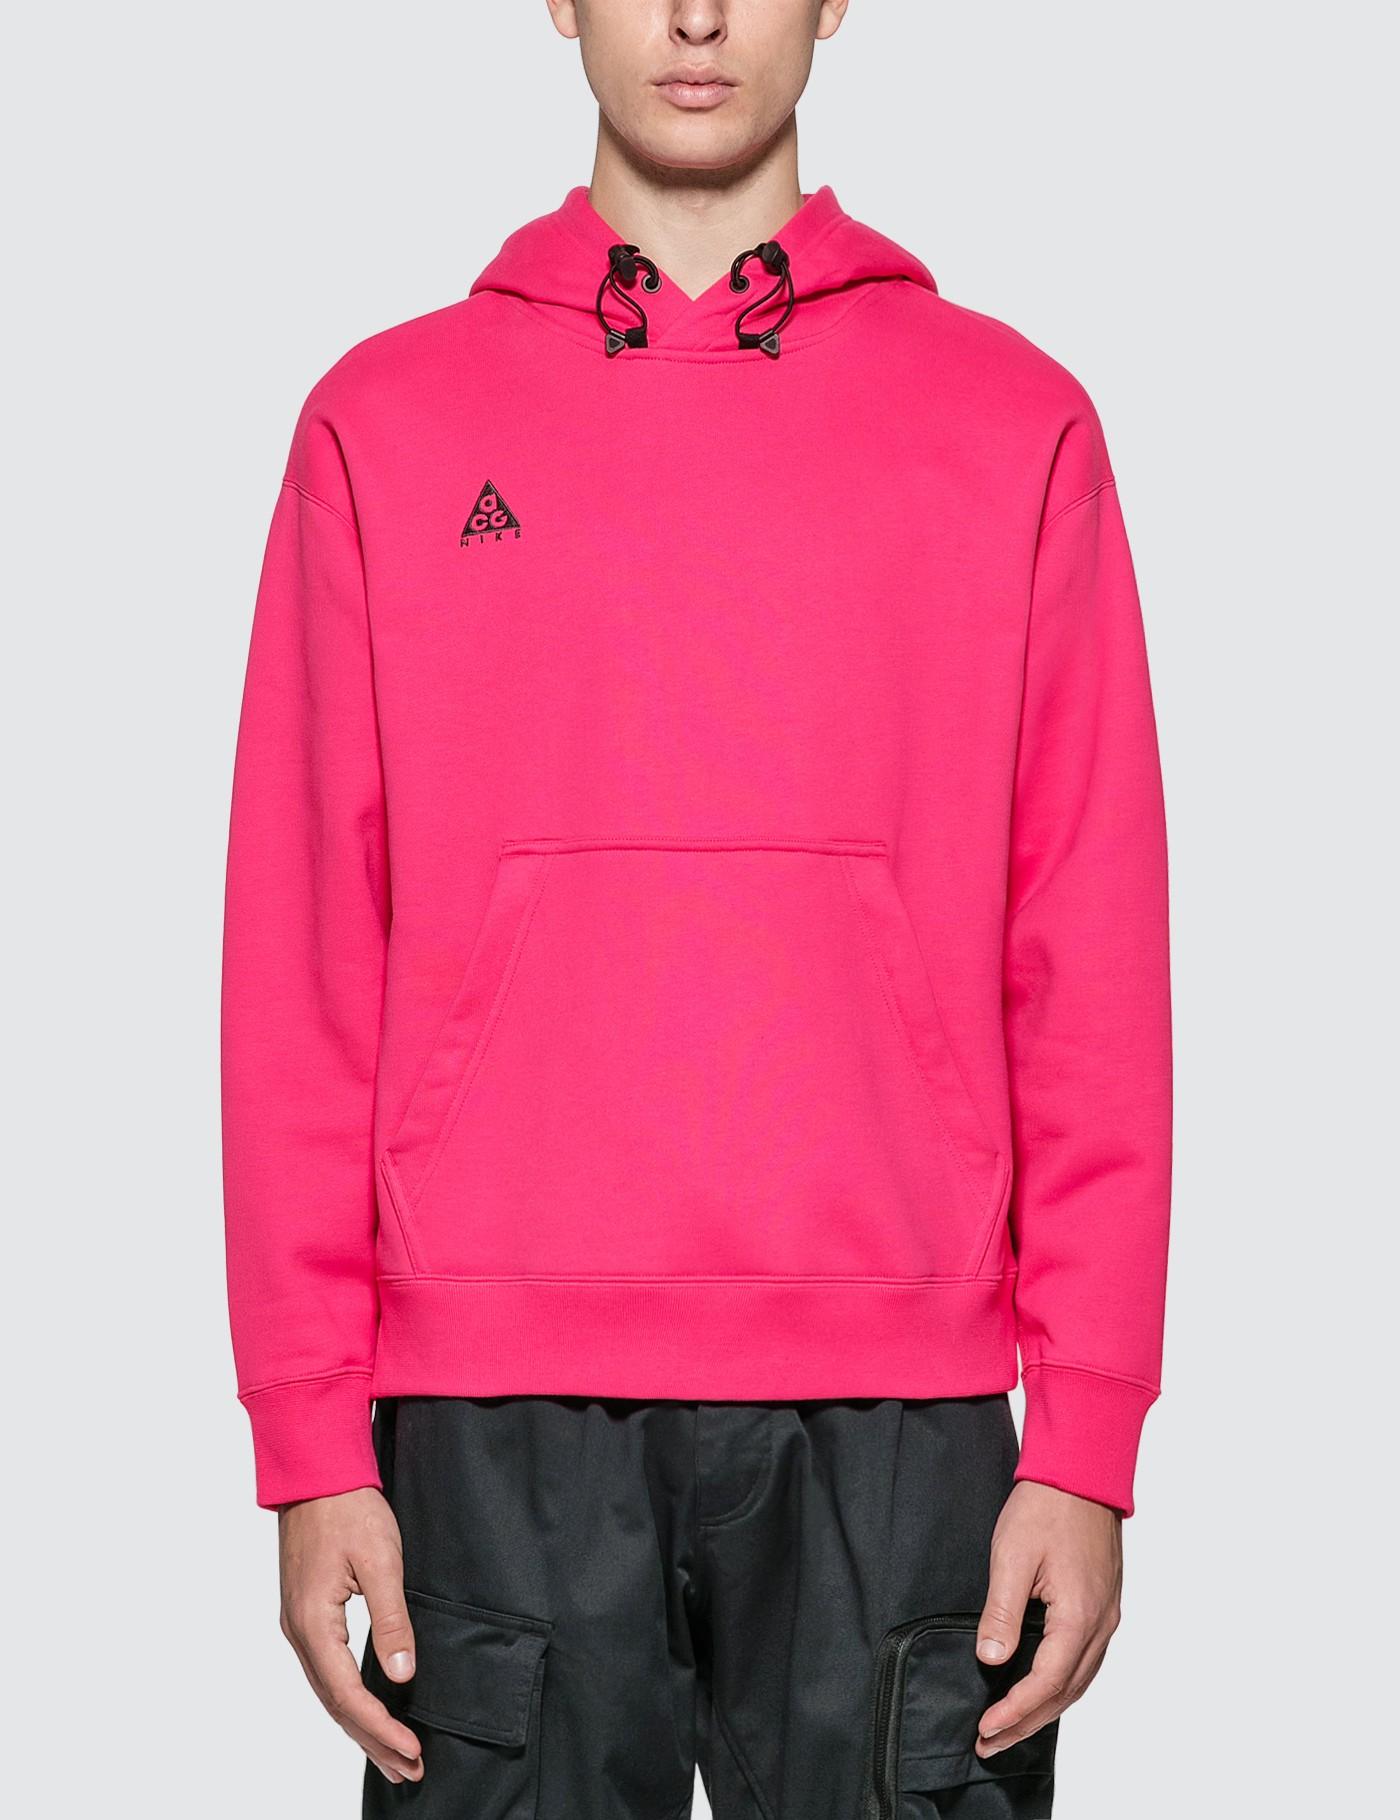 Nike Cotton Acg Pullover Hoodie in Pink 